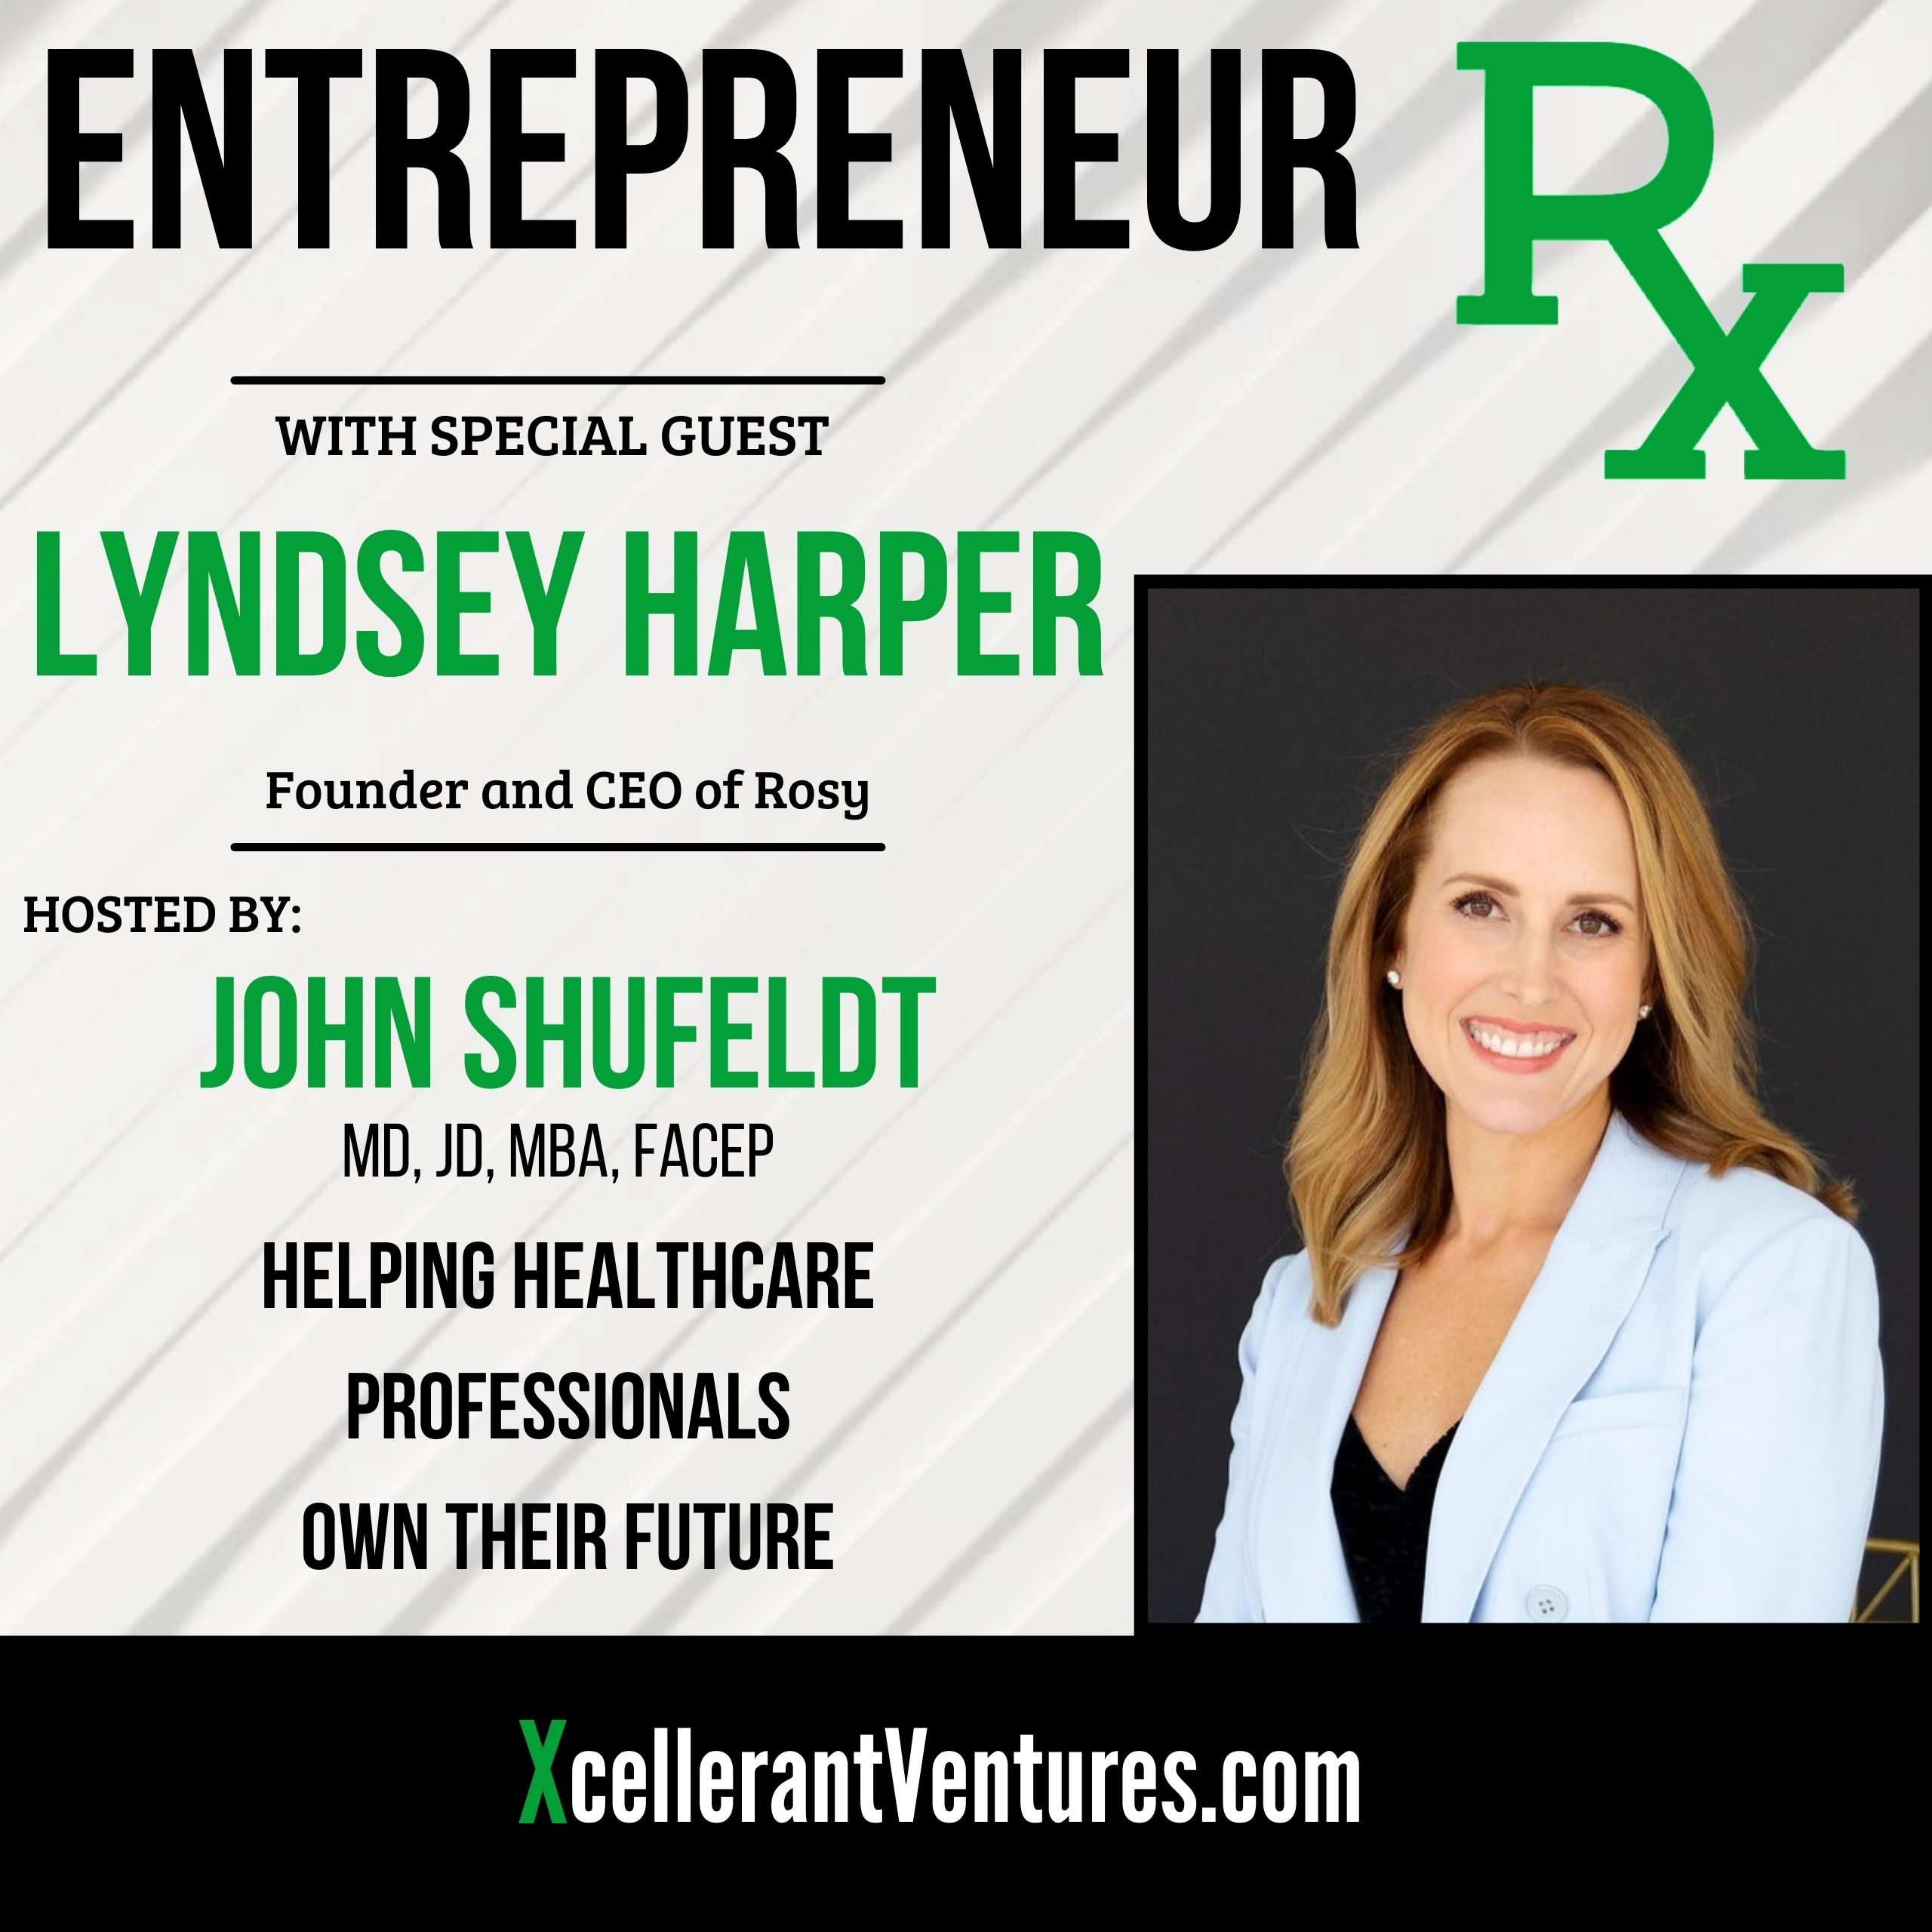 RX49: Lyndsey Harper, MD, Founder and CEO of Rosy